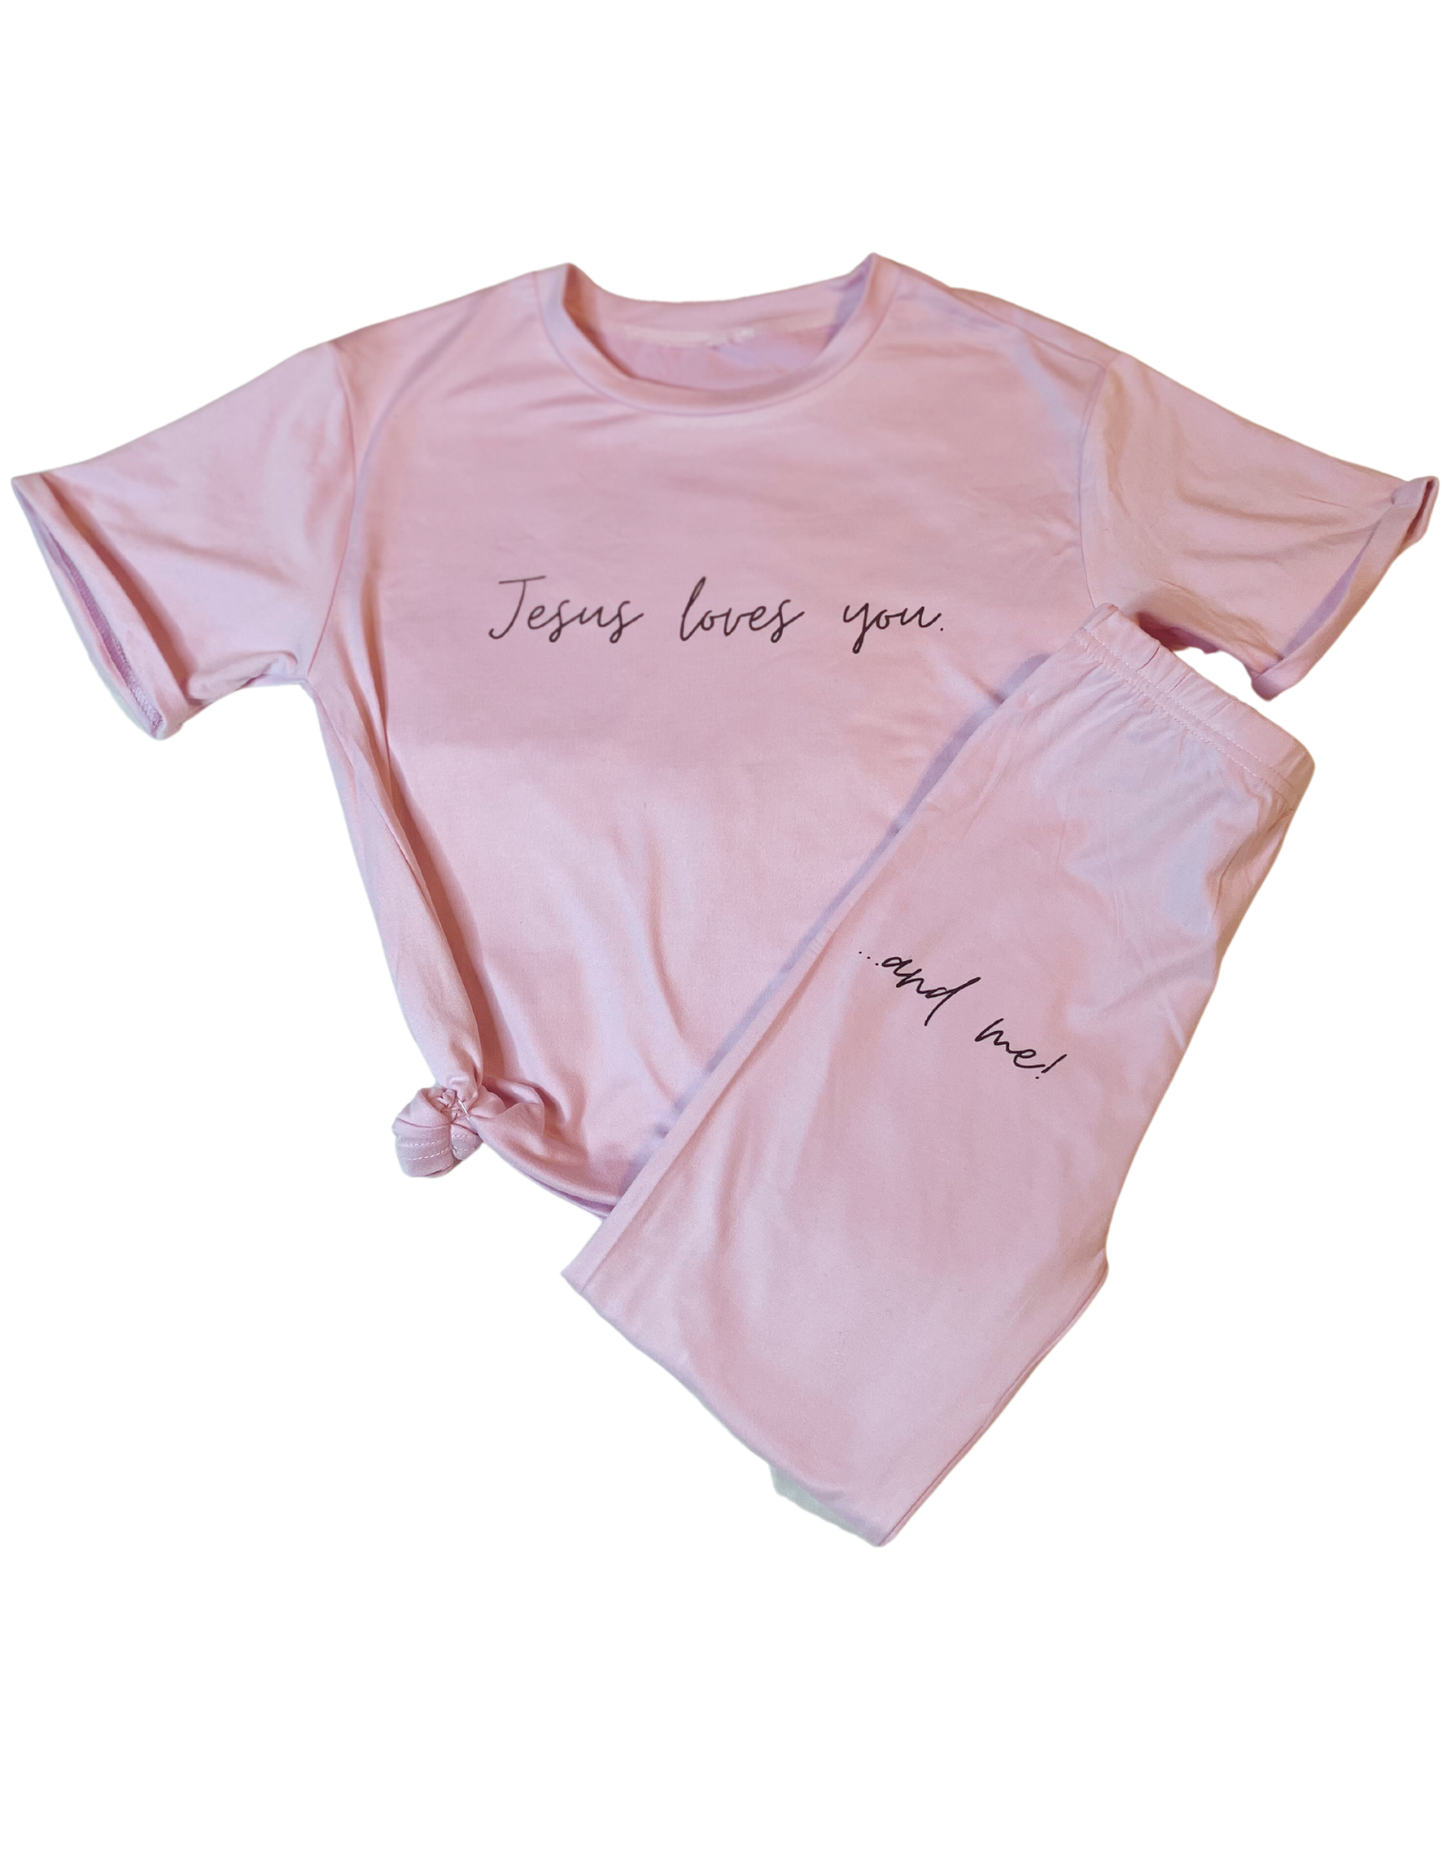 Little Girls Matching Set- Jesus loves you...and me!